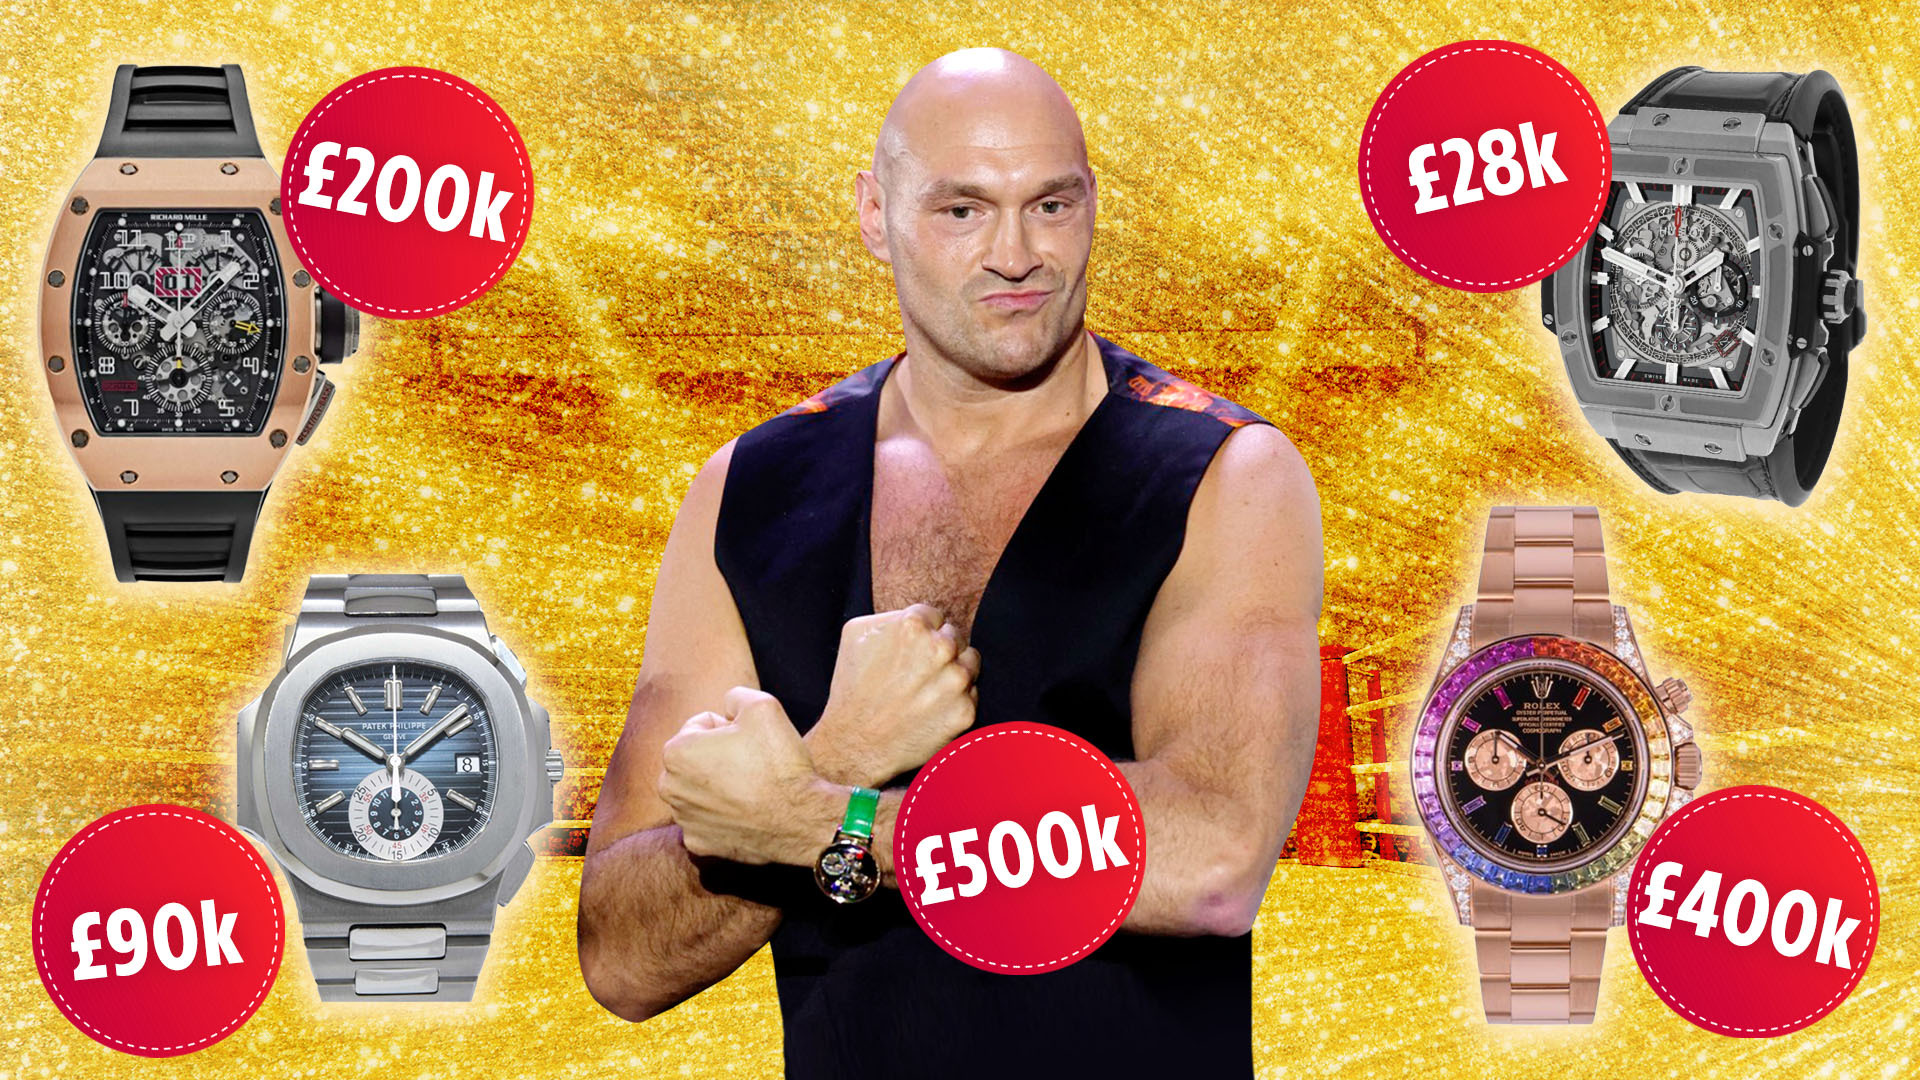 Tyson Fury’s insane watch collection, from a 500k ‘Ring of Fire’ timepiece to a Richard Mille worn by Felipe Massa [Video]